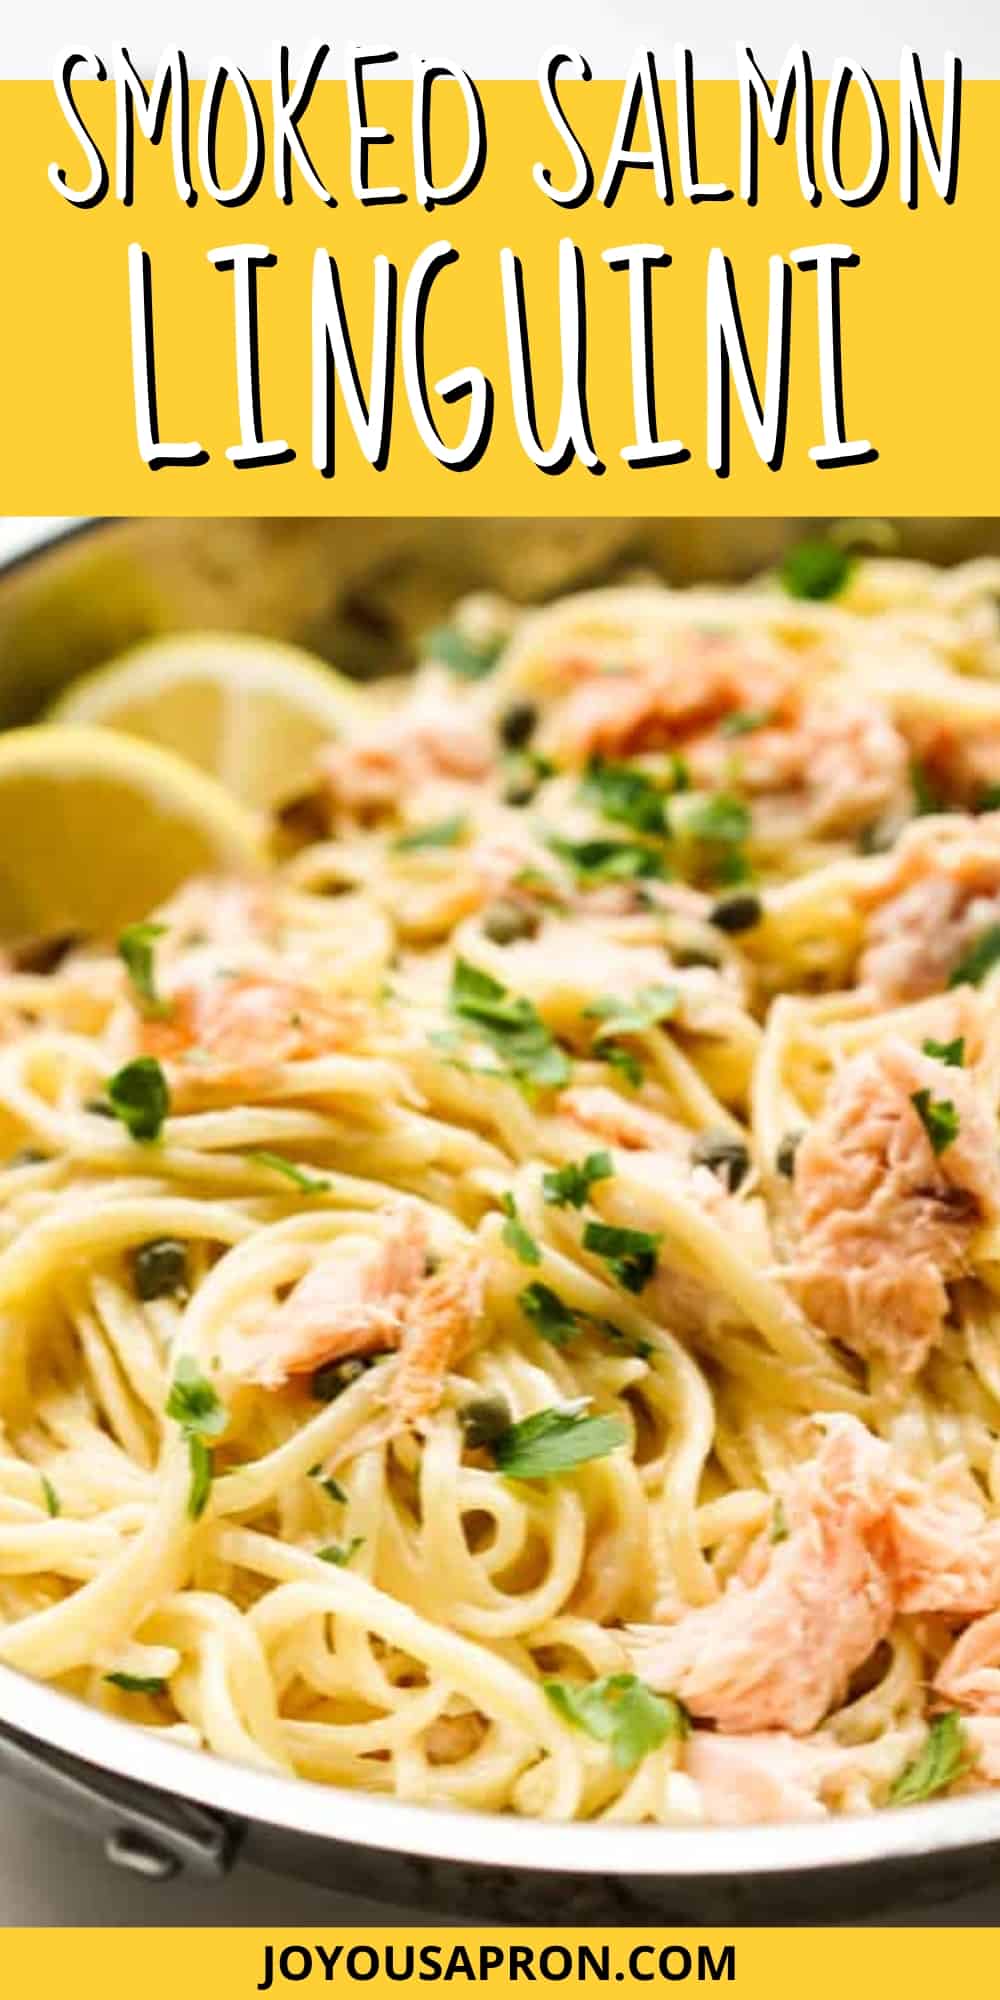 Smoked Salmon Pasta - this creamy pasta recipe is tossed in a lemon cream sauce, along with smoked salmon and capers. Ready under 30 minutes, it makes the most delicious weeknight dinner! via @joyousapron